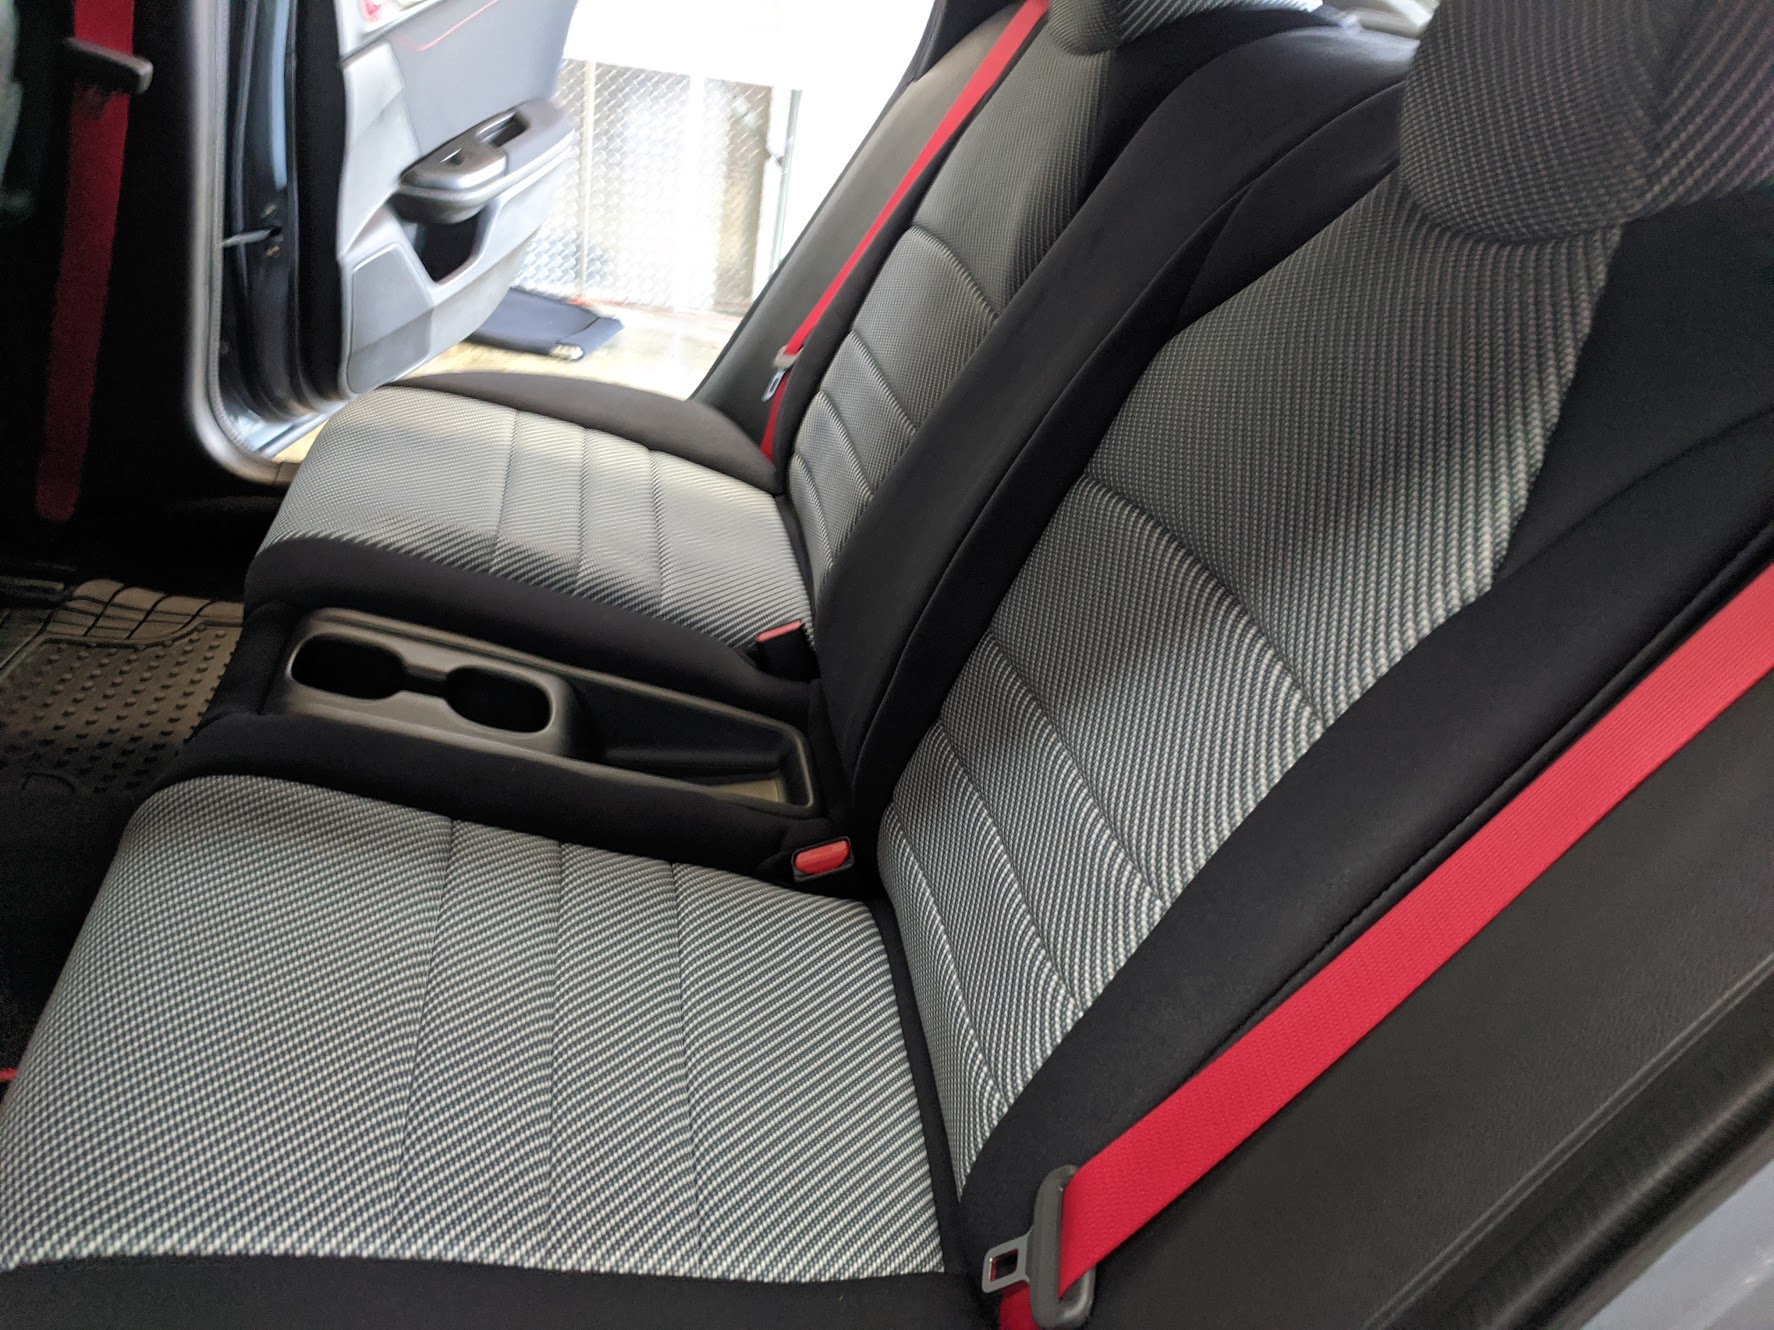 Finally, custom Wet Okole CTR seat covers (Extremely pic heavy) FYI  2016+  Honda Civic Forum (10th Gen) - Type R Forum, Si Forum 